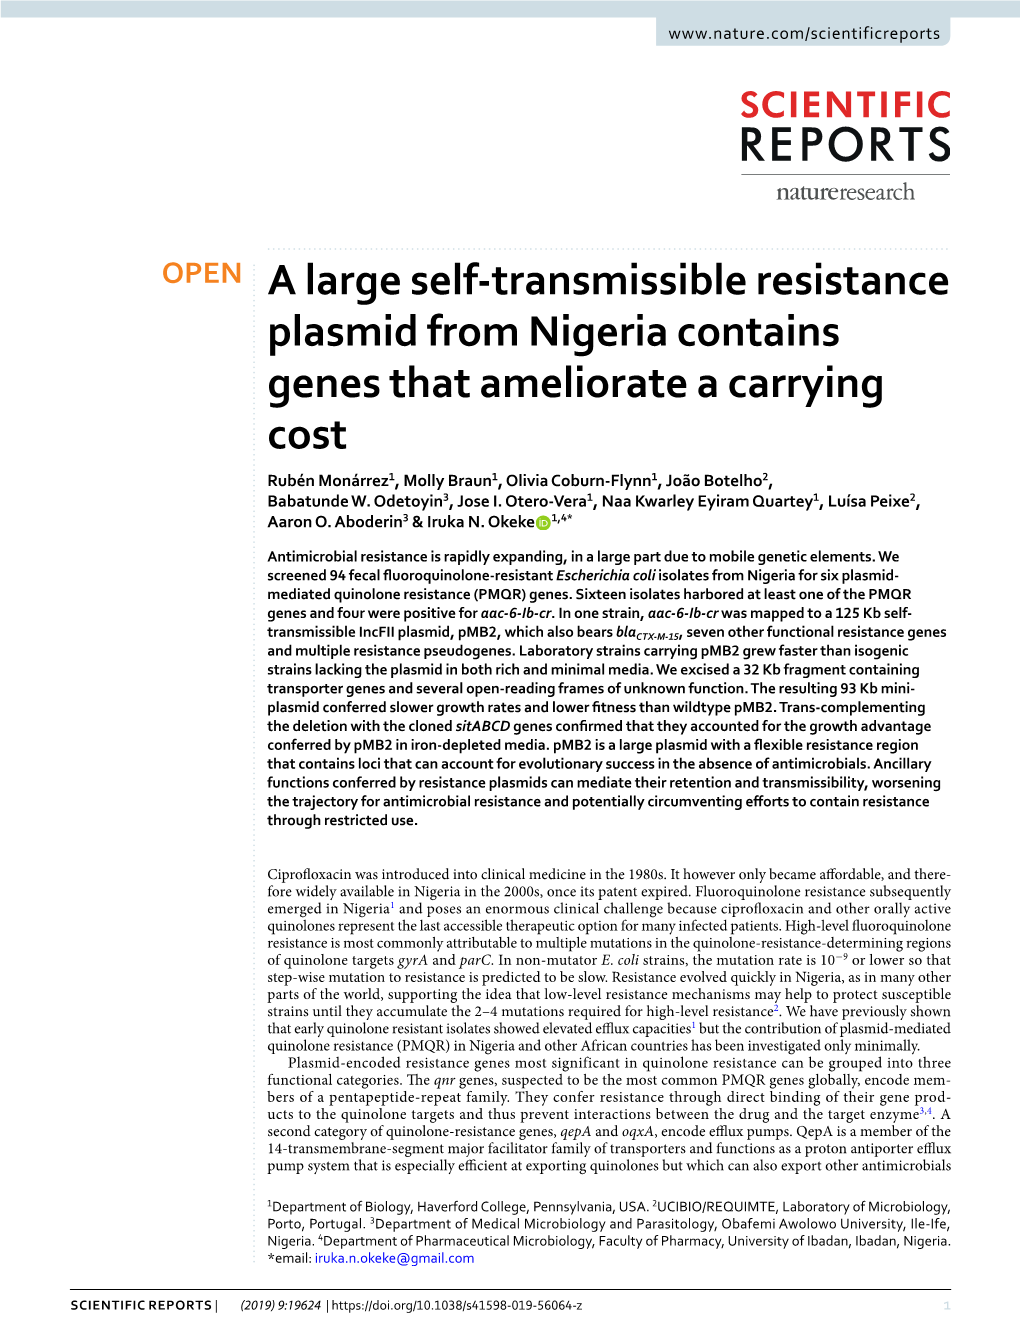 A Large Self-Transmissible Resistance Plasmid from Nigeria Contains